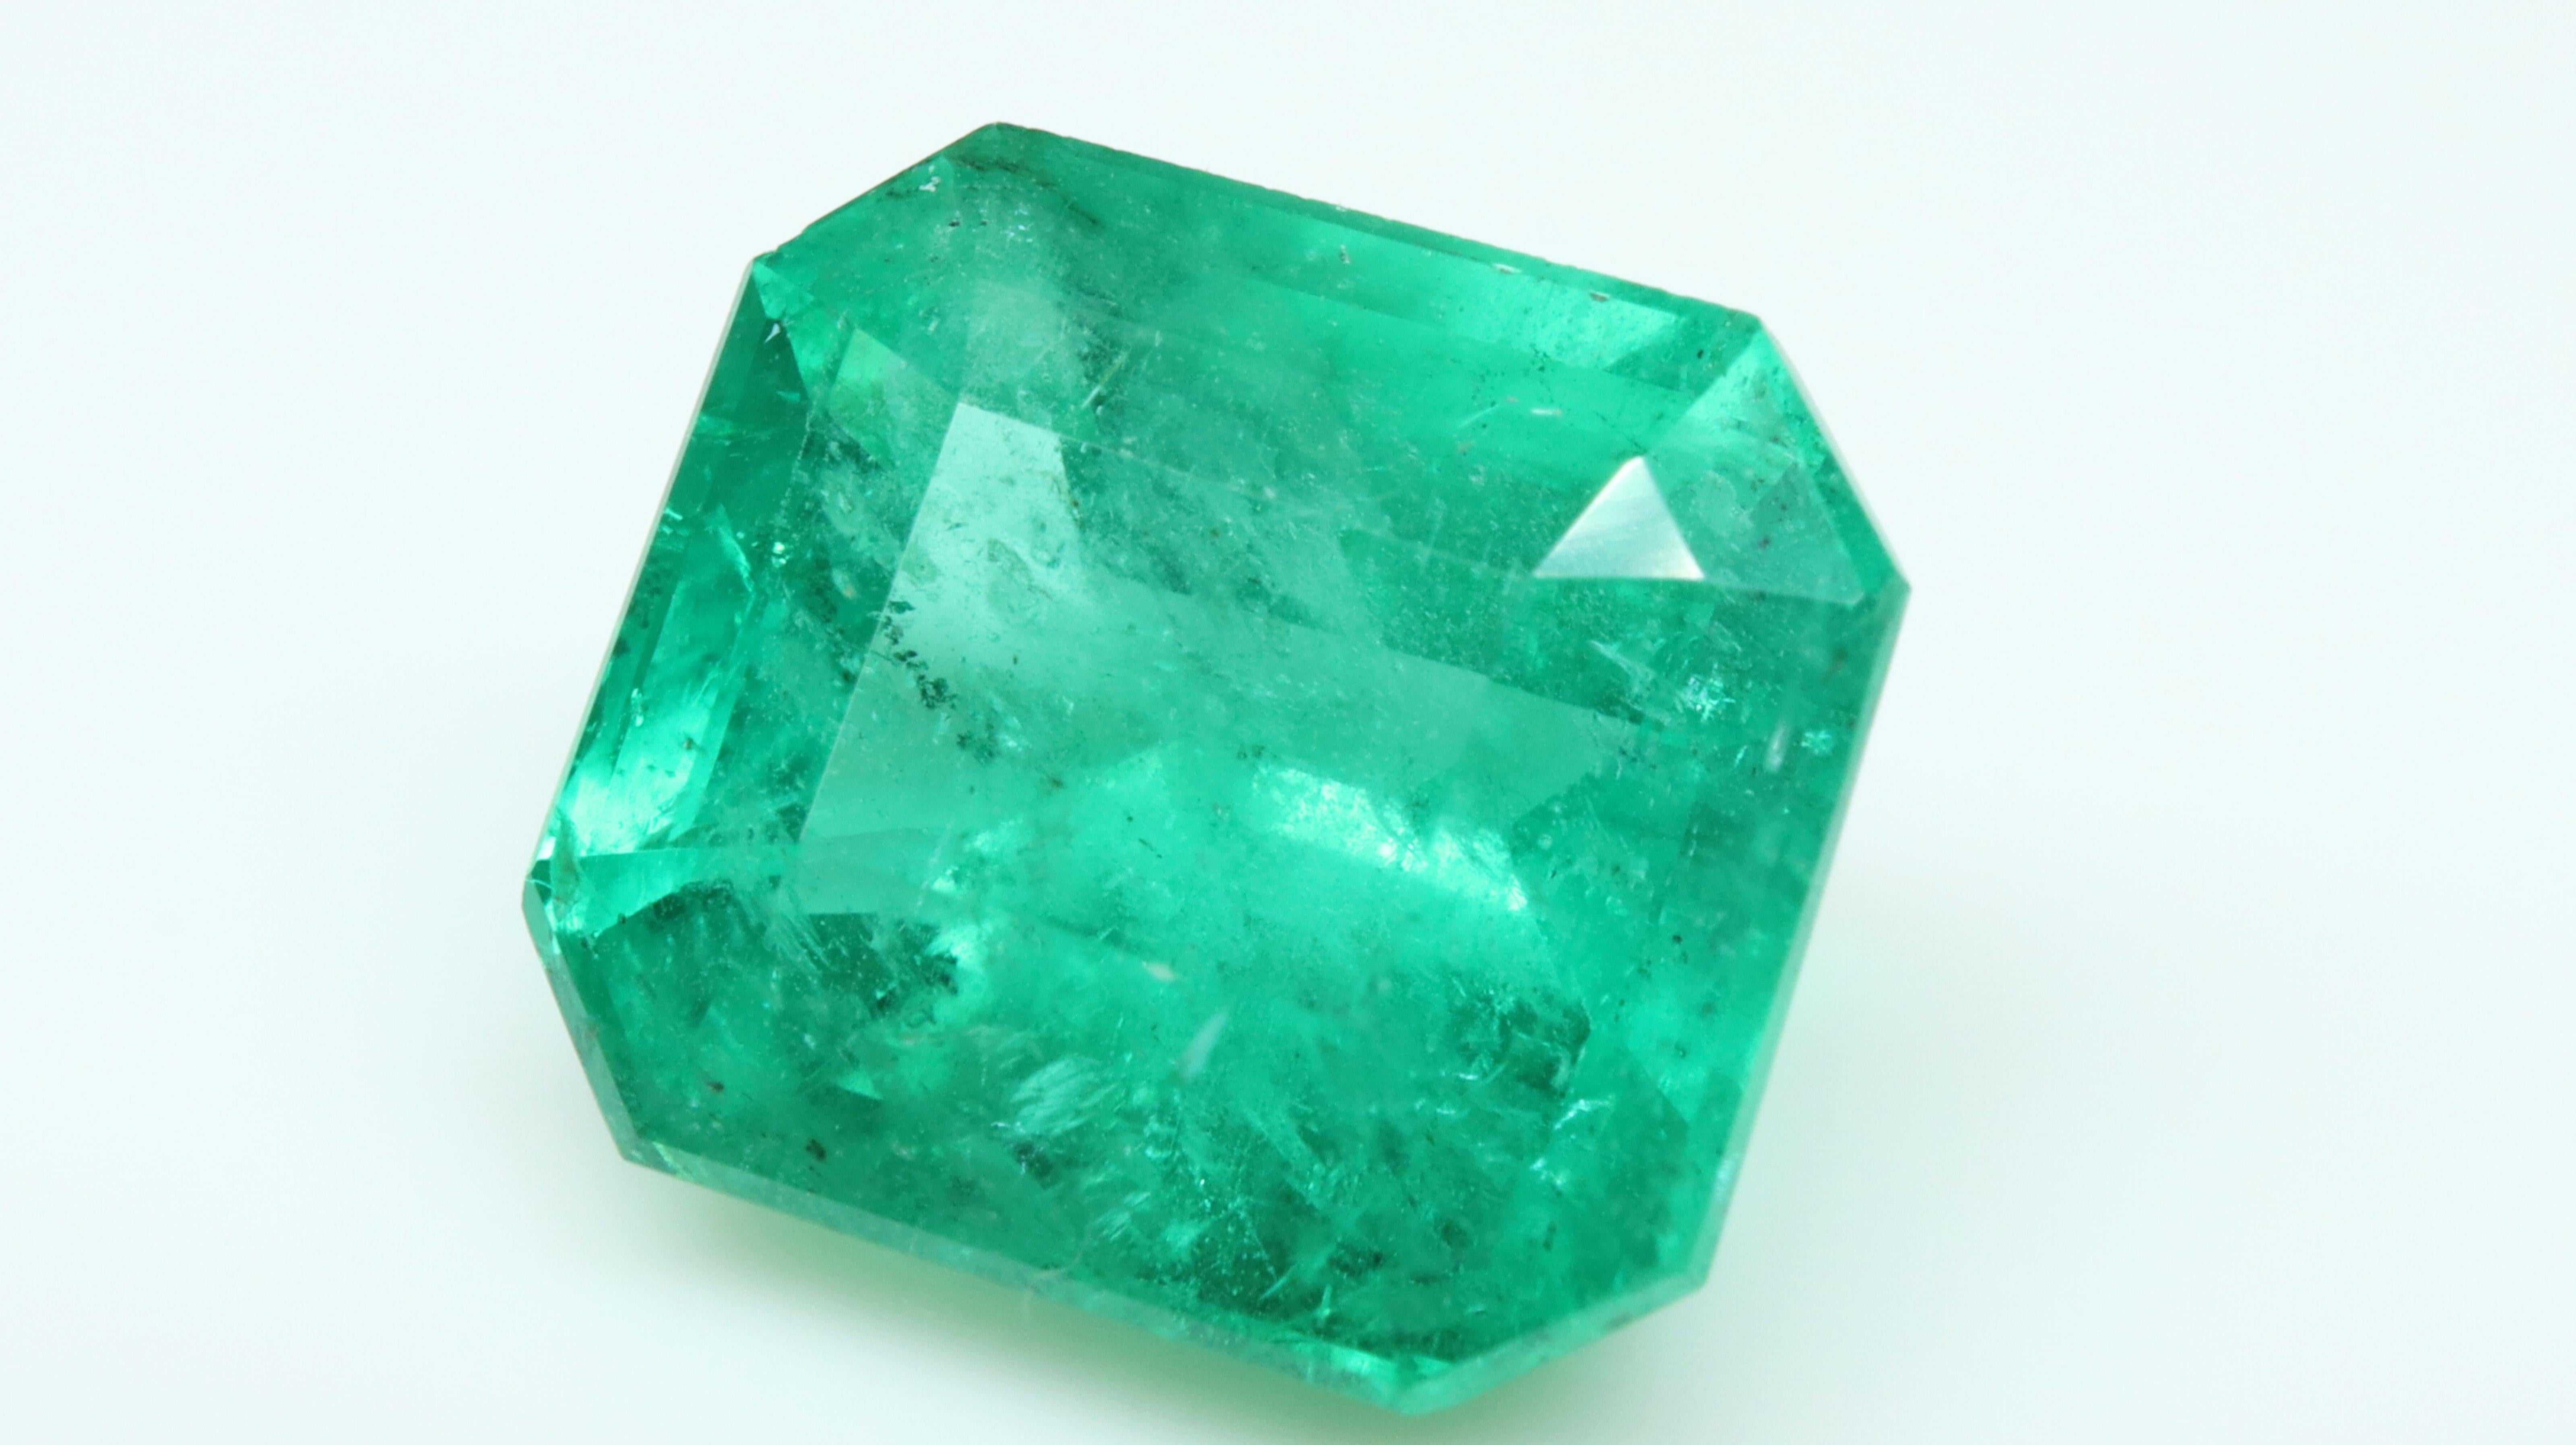 Lovely Emerald well proportionate and the color is evenly distributed.

Emeralds are naturally porous and inclusive stones, with surface reaching fractures and in order to improve its clarity, it is a common and widely accepted practice in the